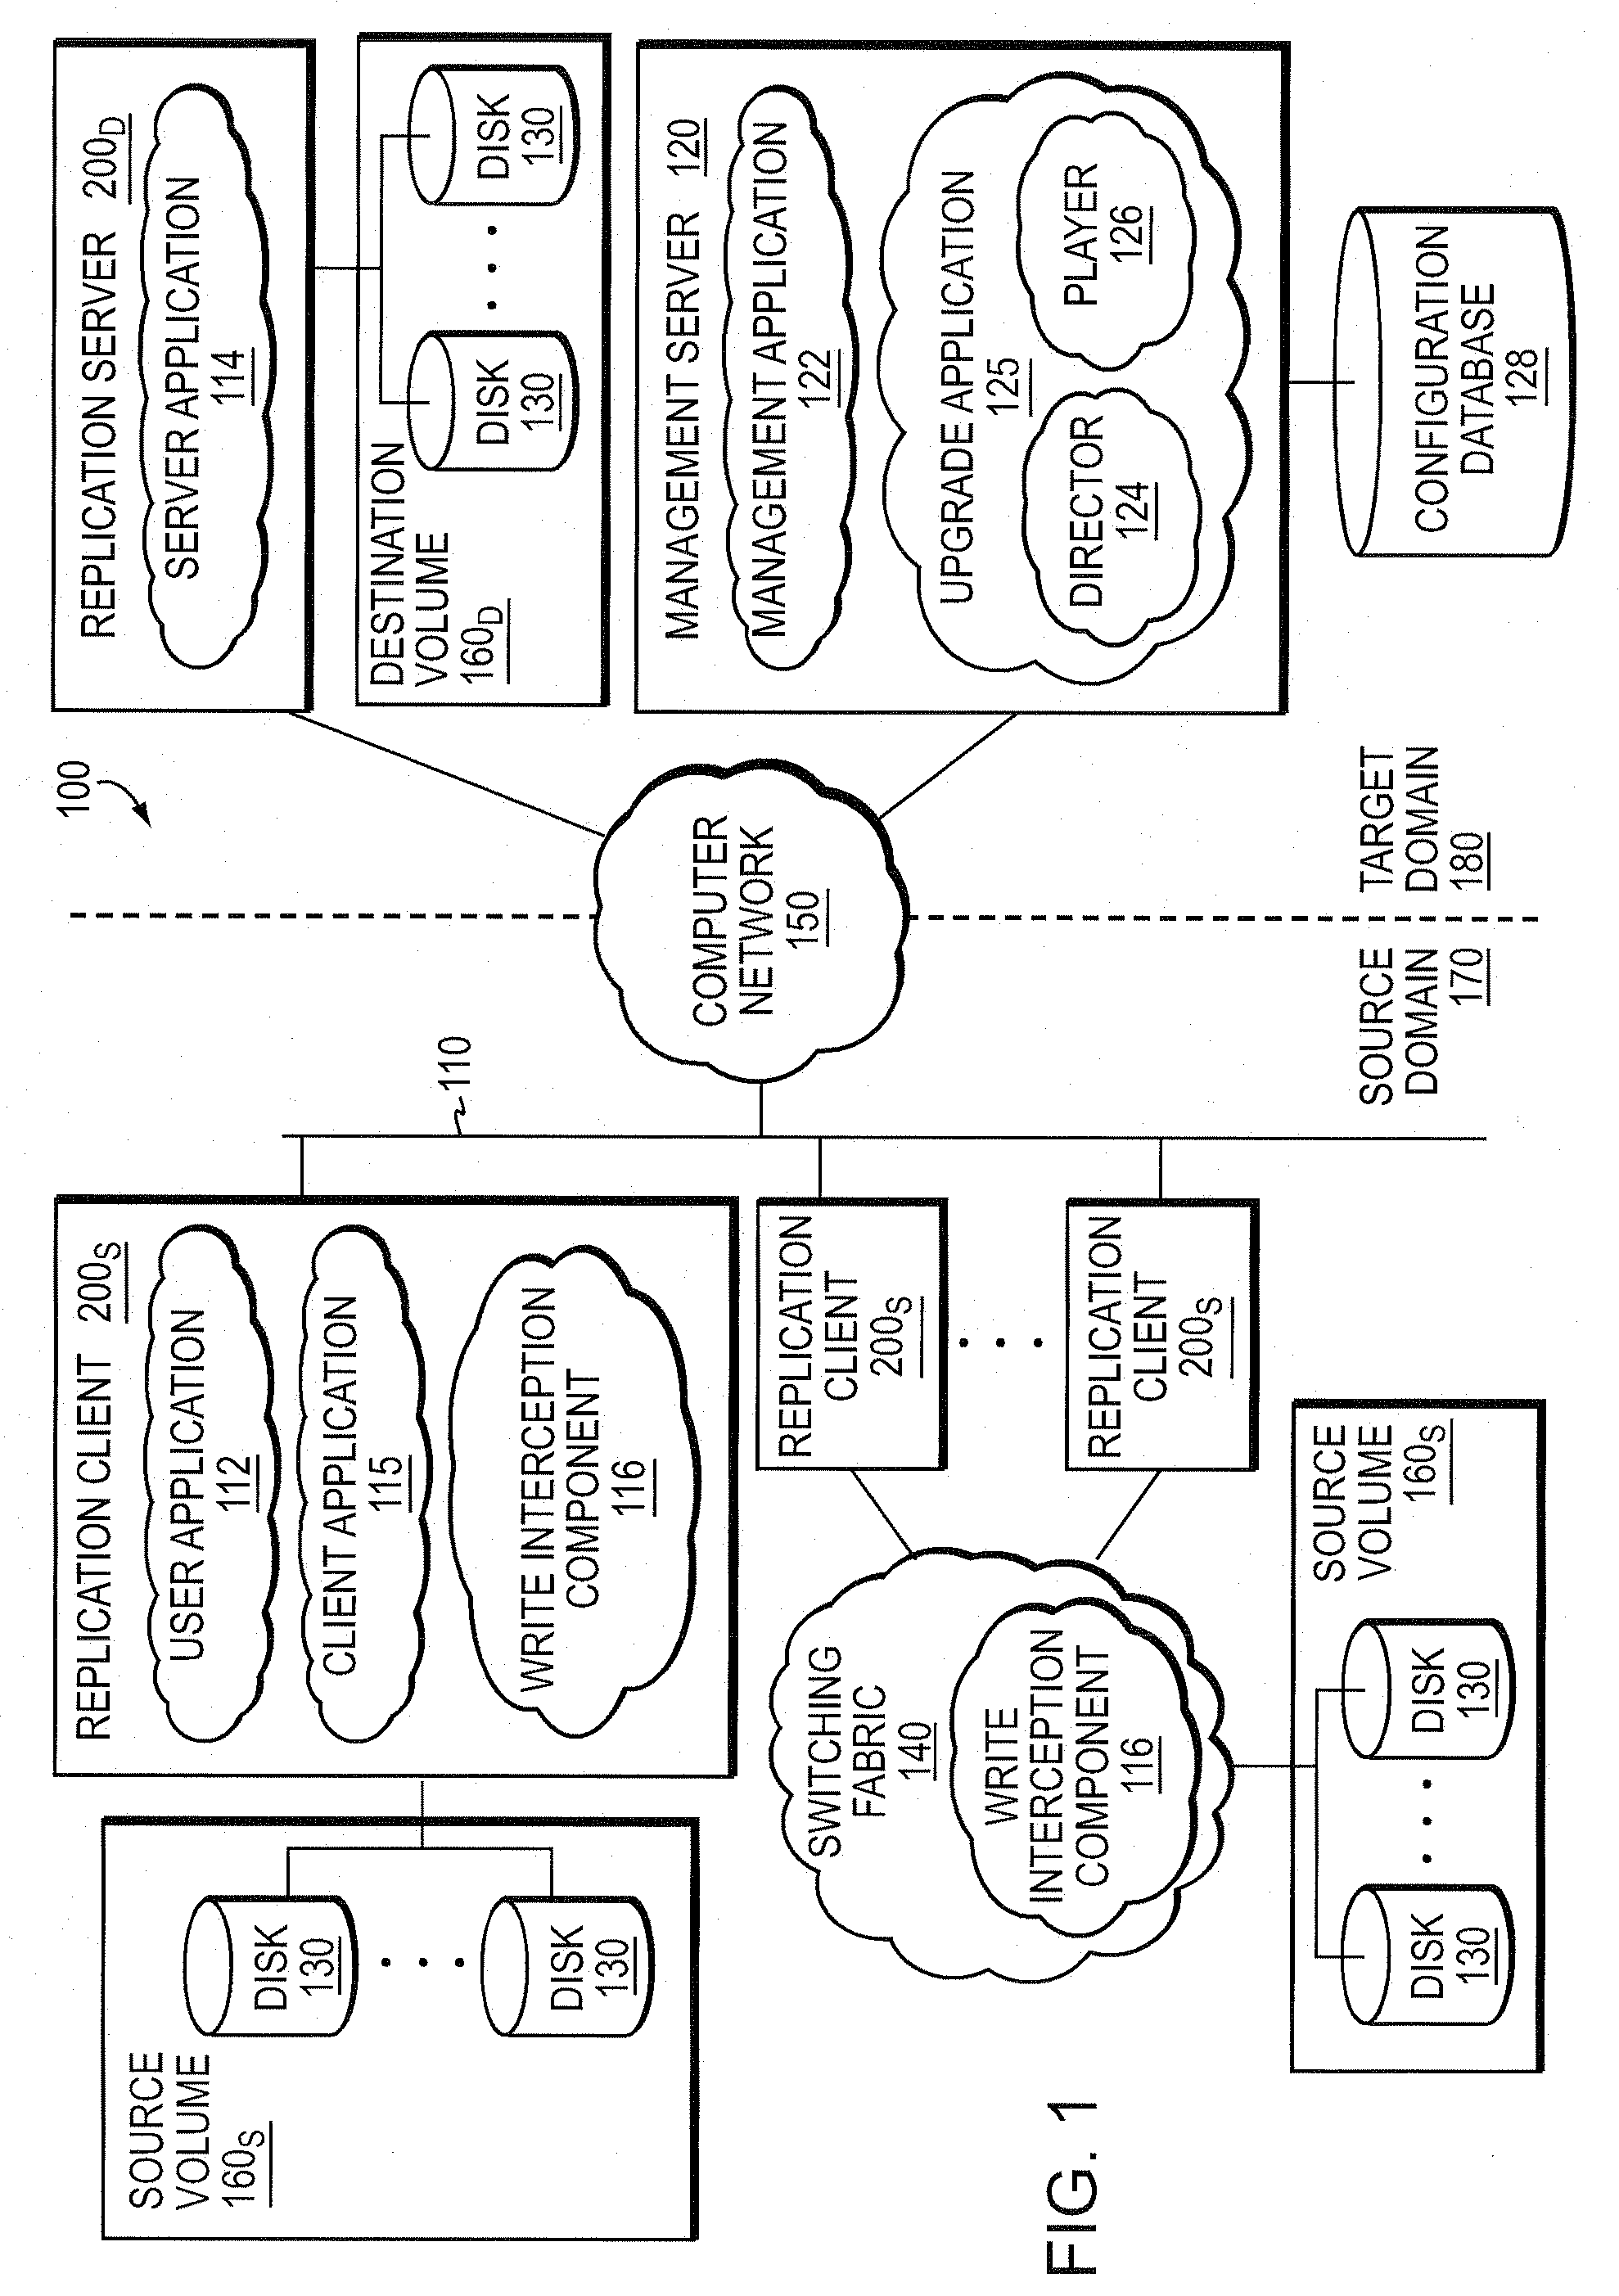 System and Method for Providing Uninterrupted Operation of a Replication System During a Software Upgrade